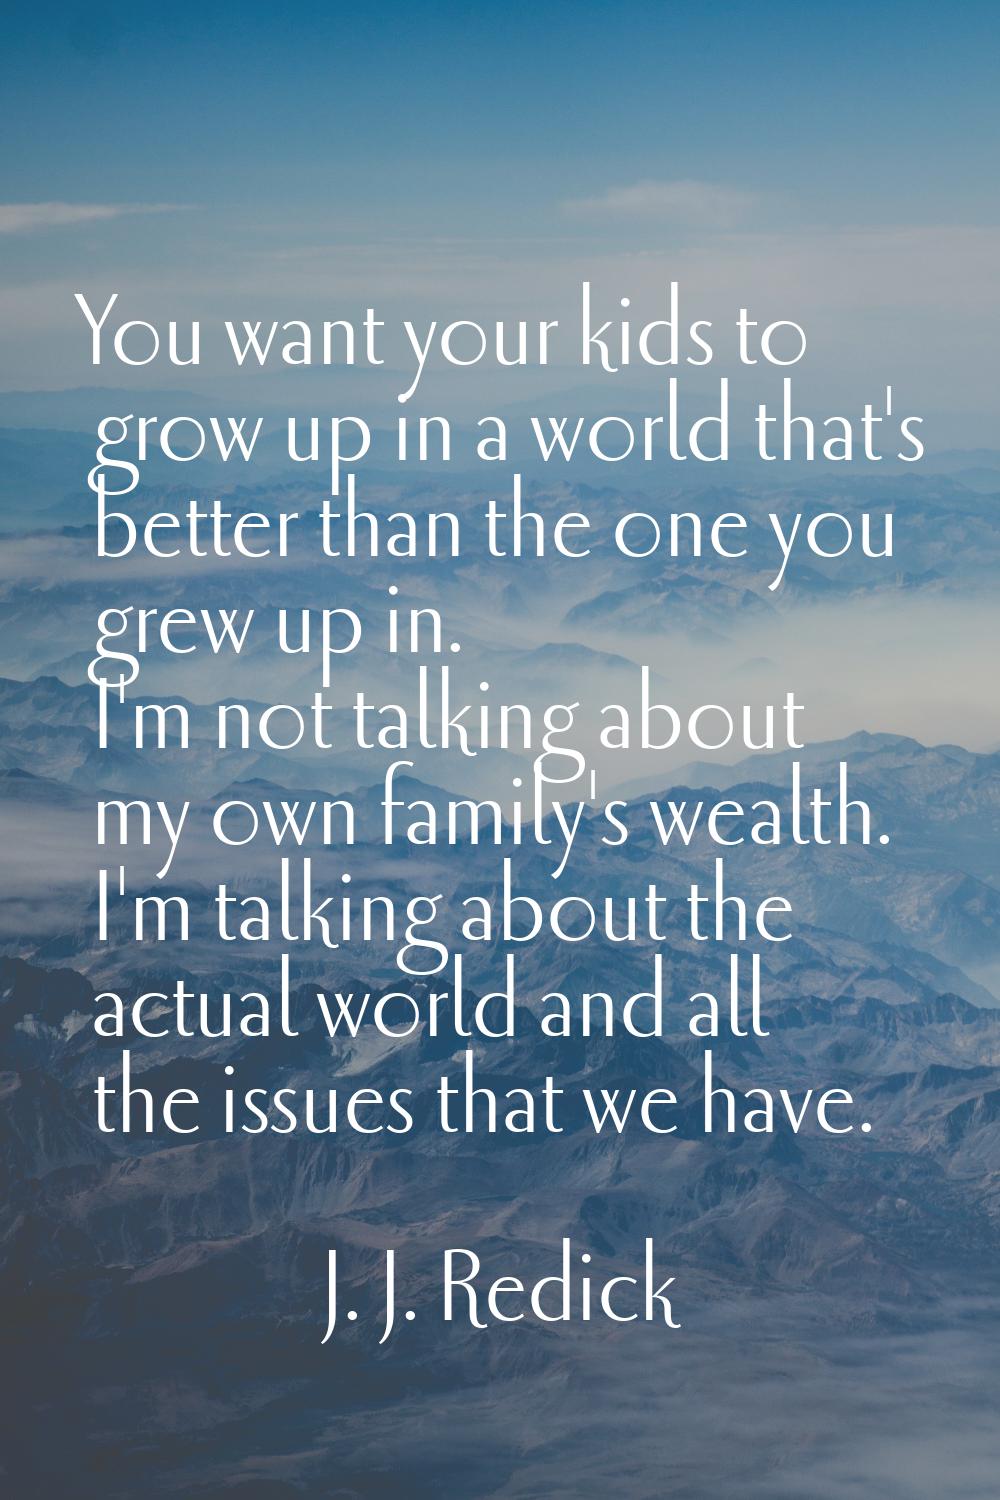 You want your kids to grow up in a world that's better than the one you grew up in. I'm not talking